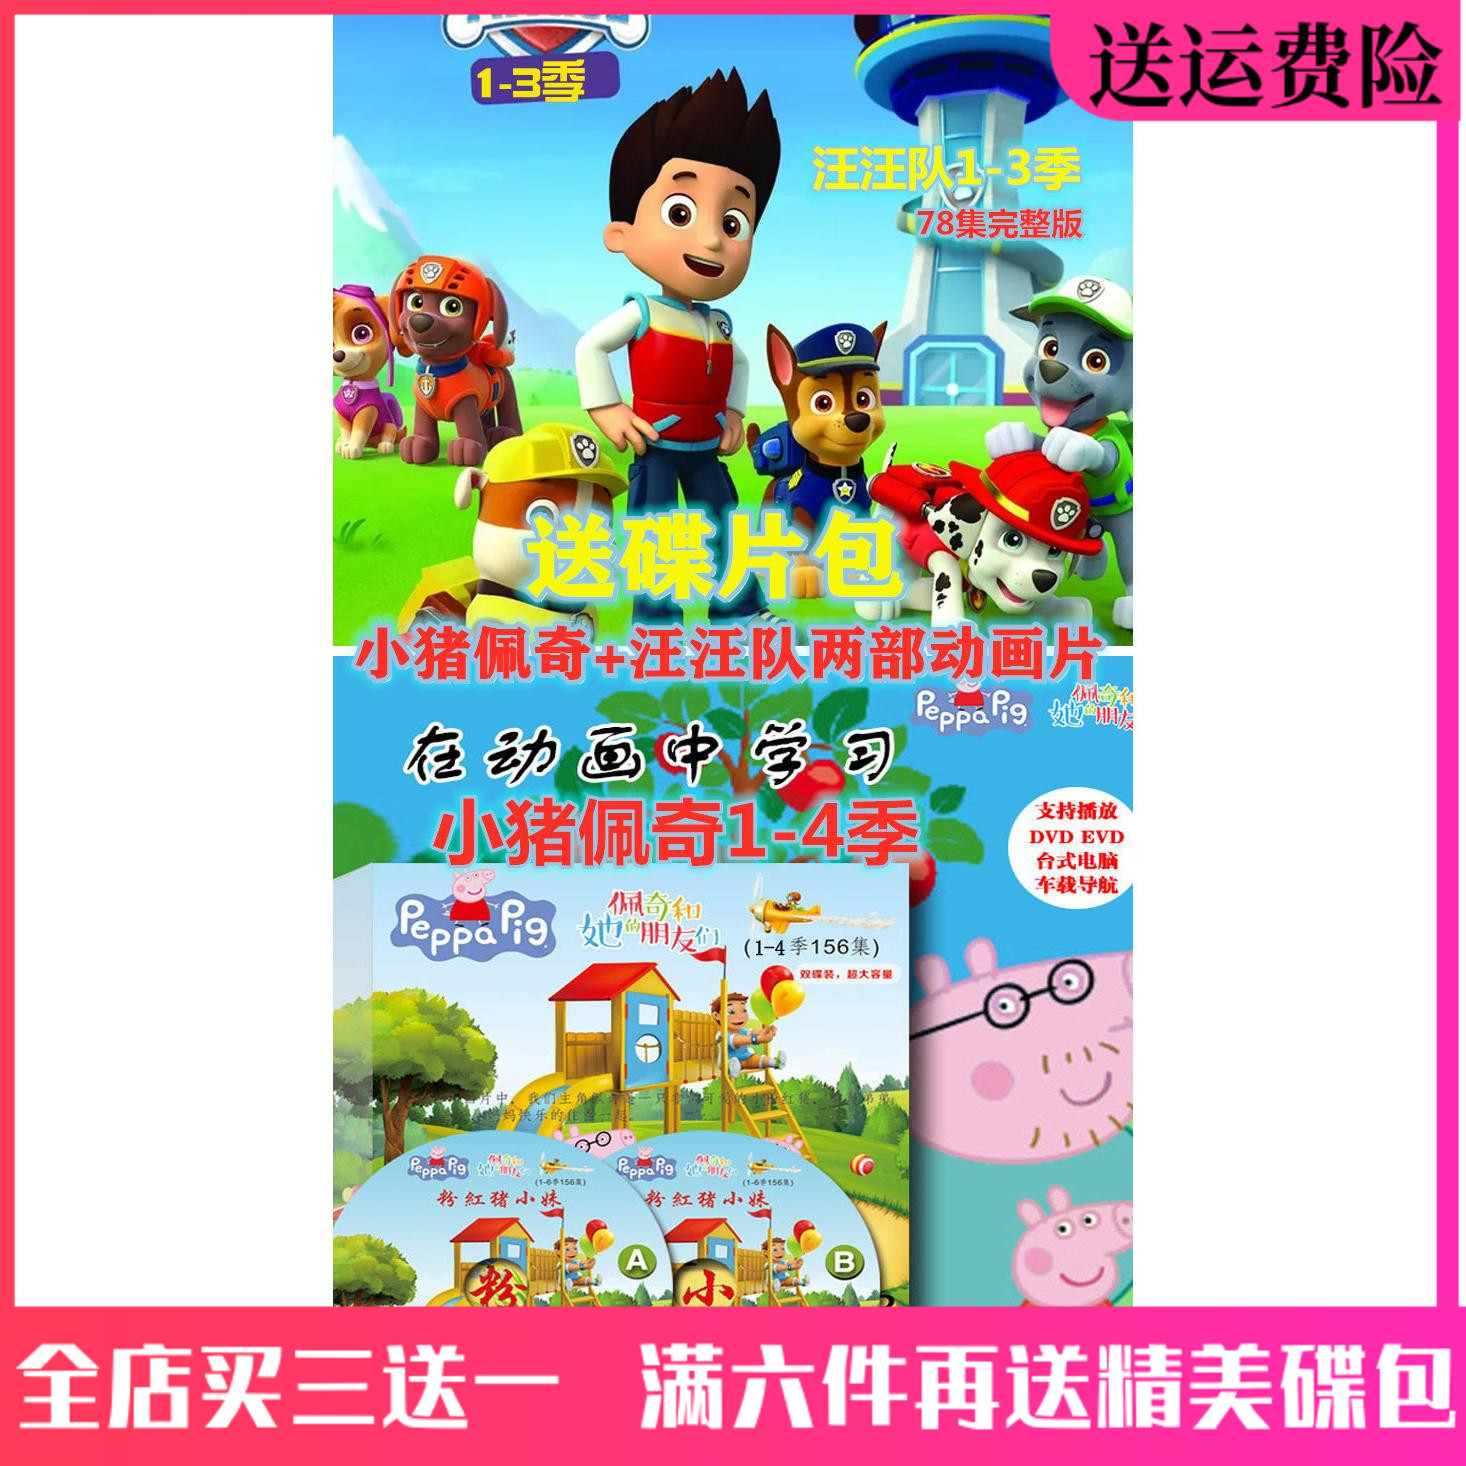 Wang Wang's 1-3-season 78-episode delivery of Little Piggy Page 156 Episode Animated DVD disc Disc Delivered Disc